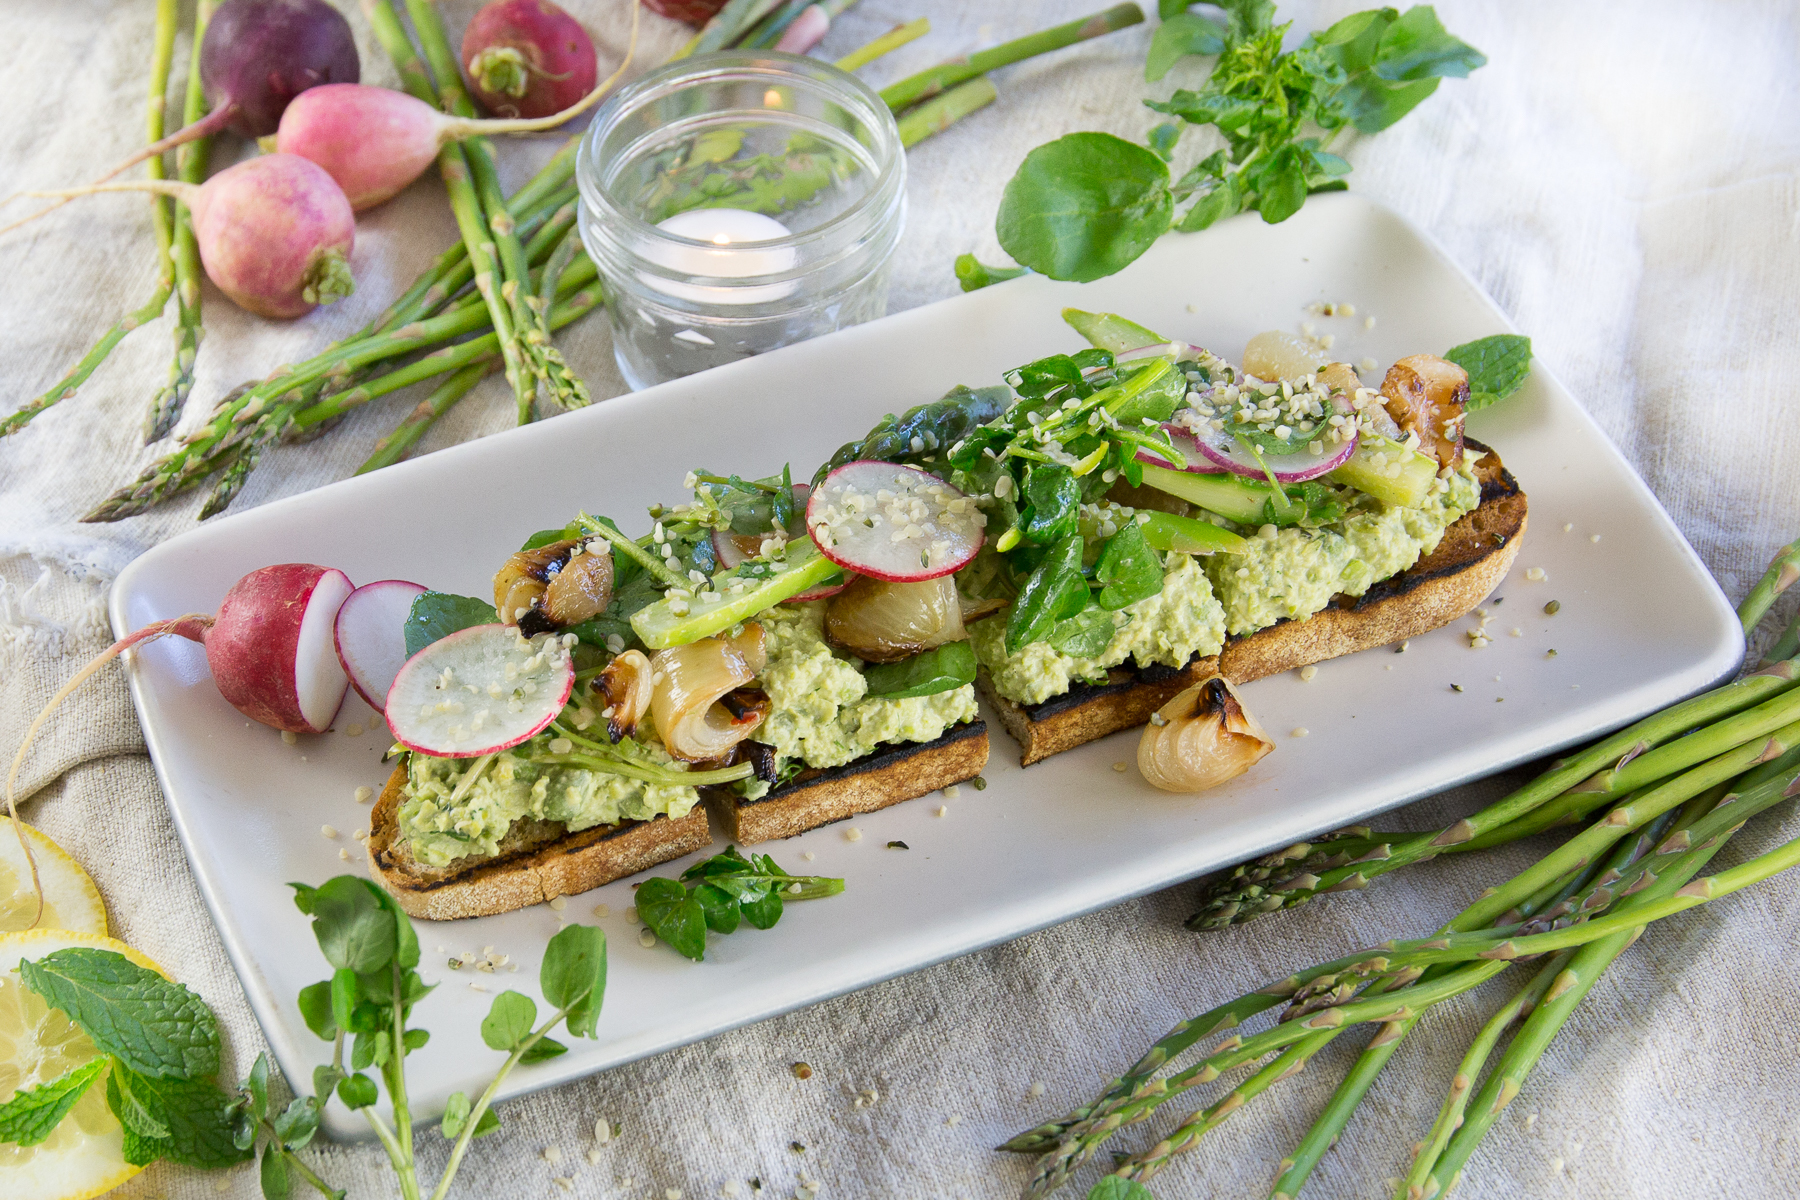 Spring asparagus toast is on the menu at True Food Kitchen. It features roasted cipollini onion, green garbanzo, tahini, mint and hemp seed.